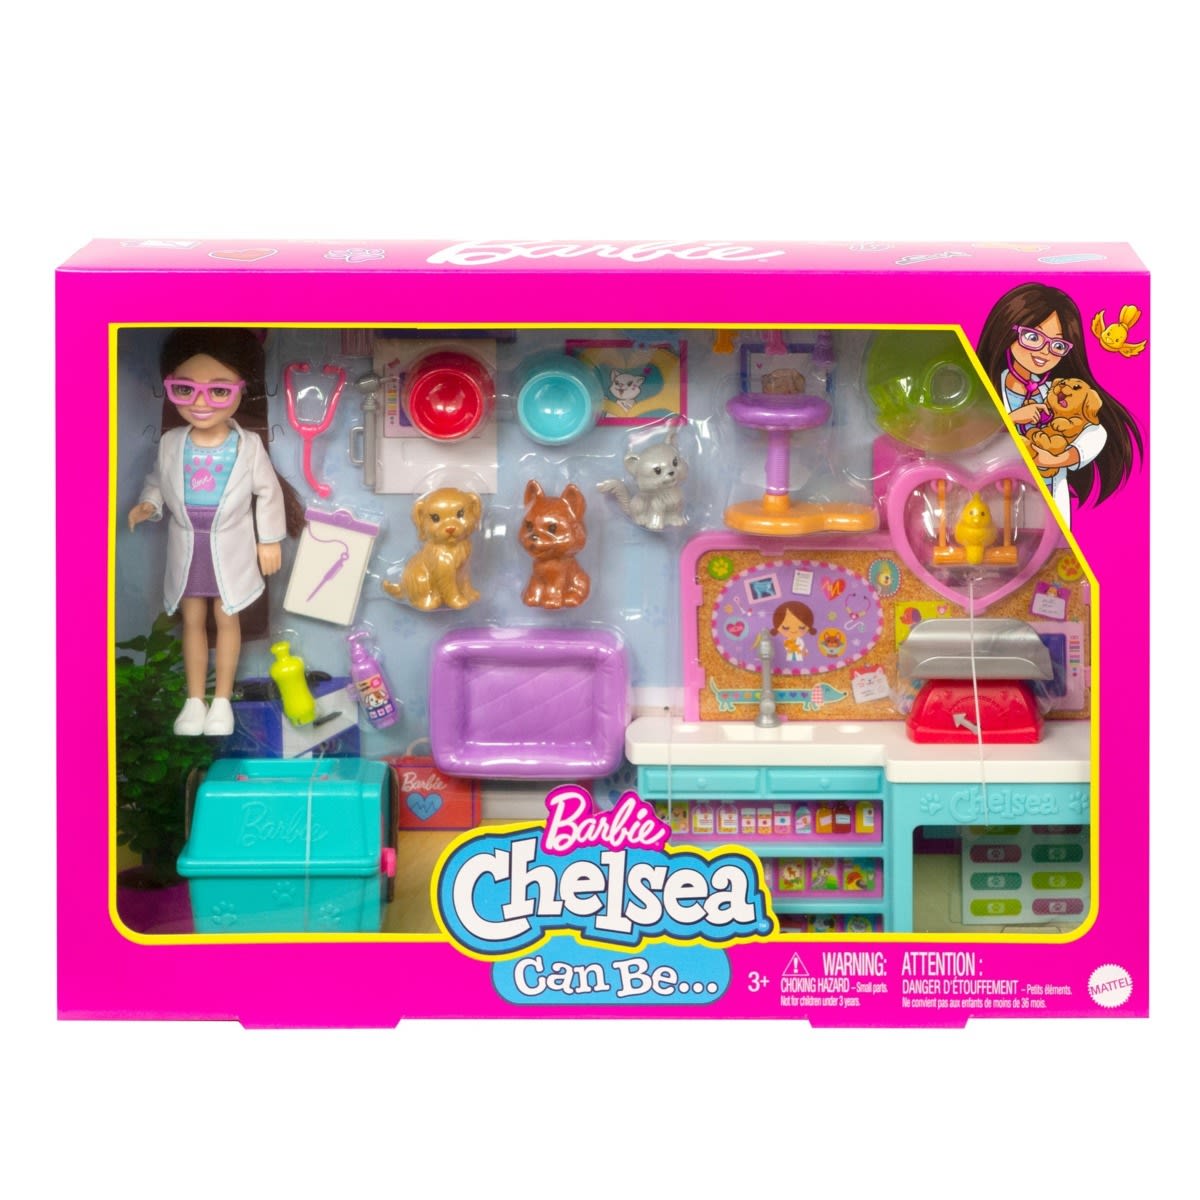 Barbie Chelsea Swing Set Playset with Chelsea Doll 6 in Brunette Swing & Slide Wearing Star-Print Skirt Pet Puppy Gift for 3 to 7 Year Olds 